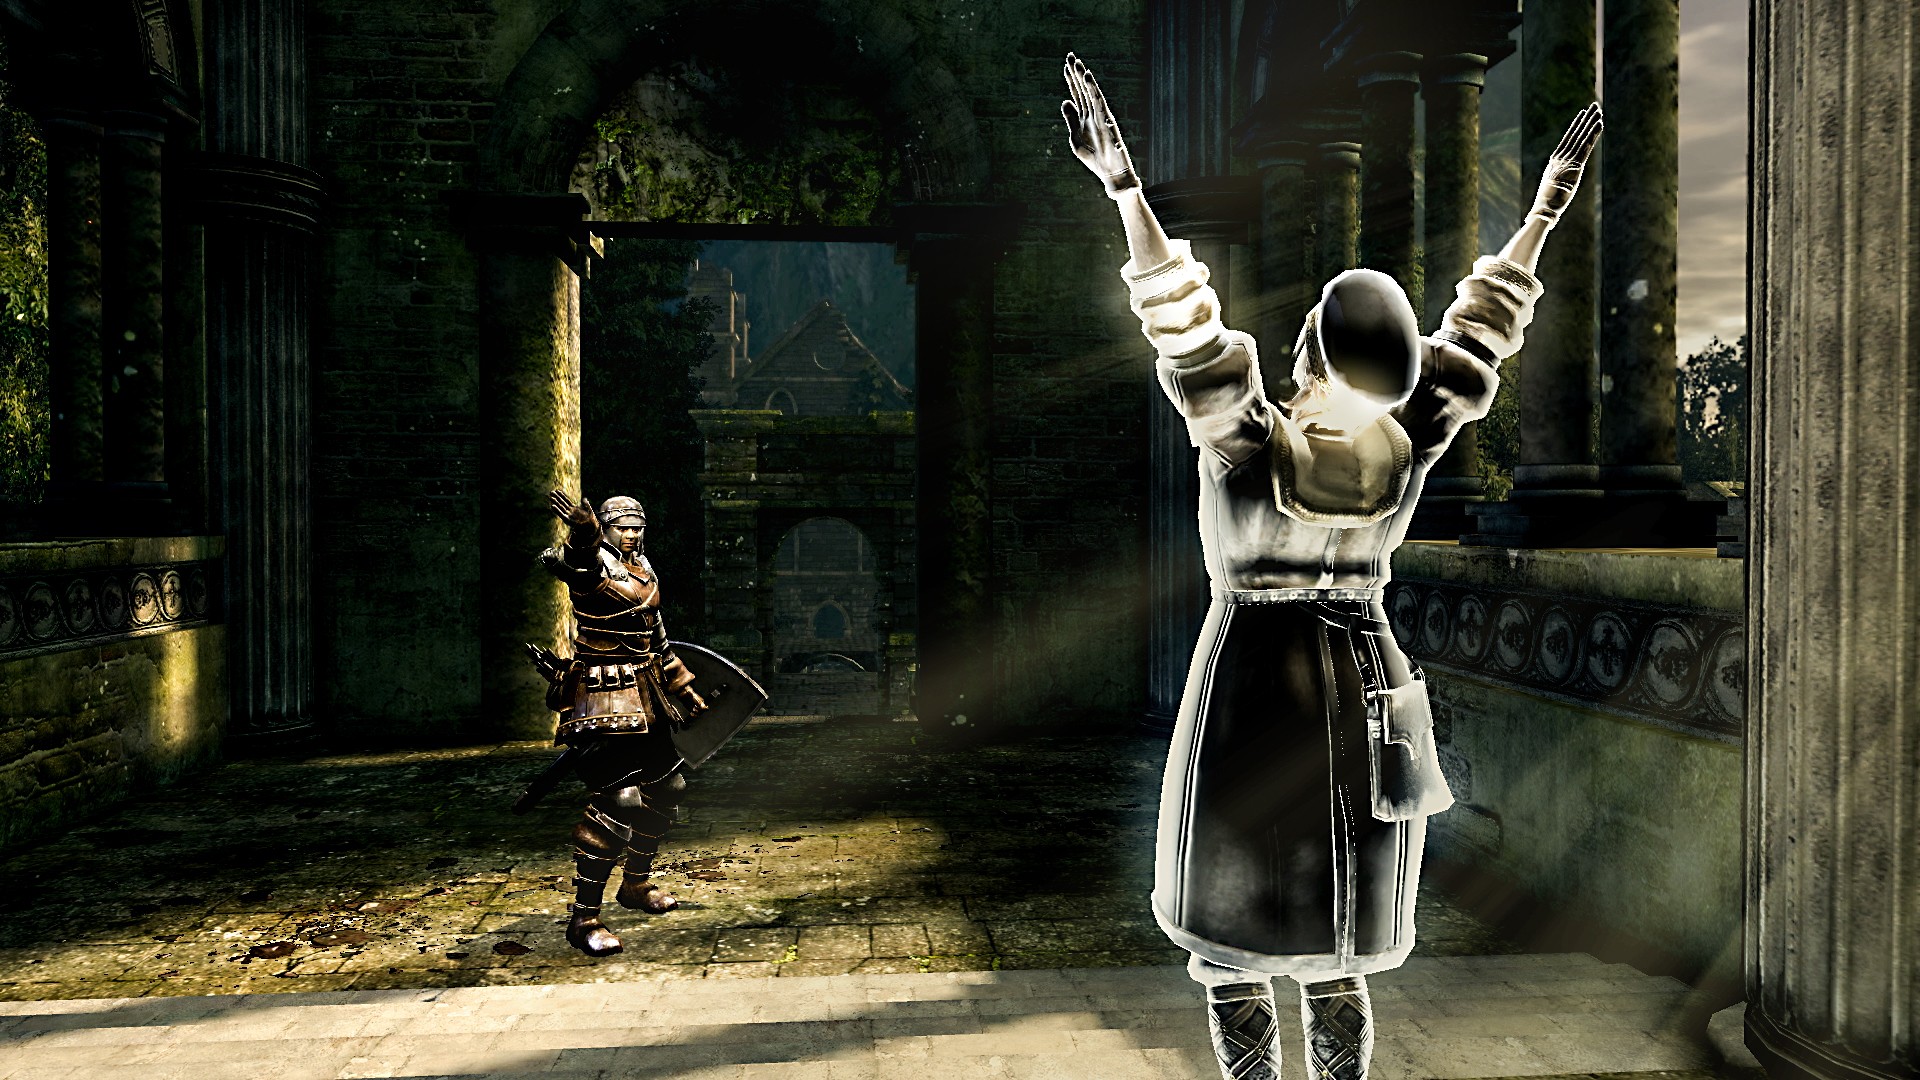 10 years on, nothing has matched the devilry of Dark Souls PvP